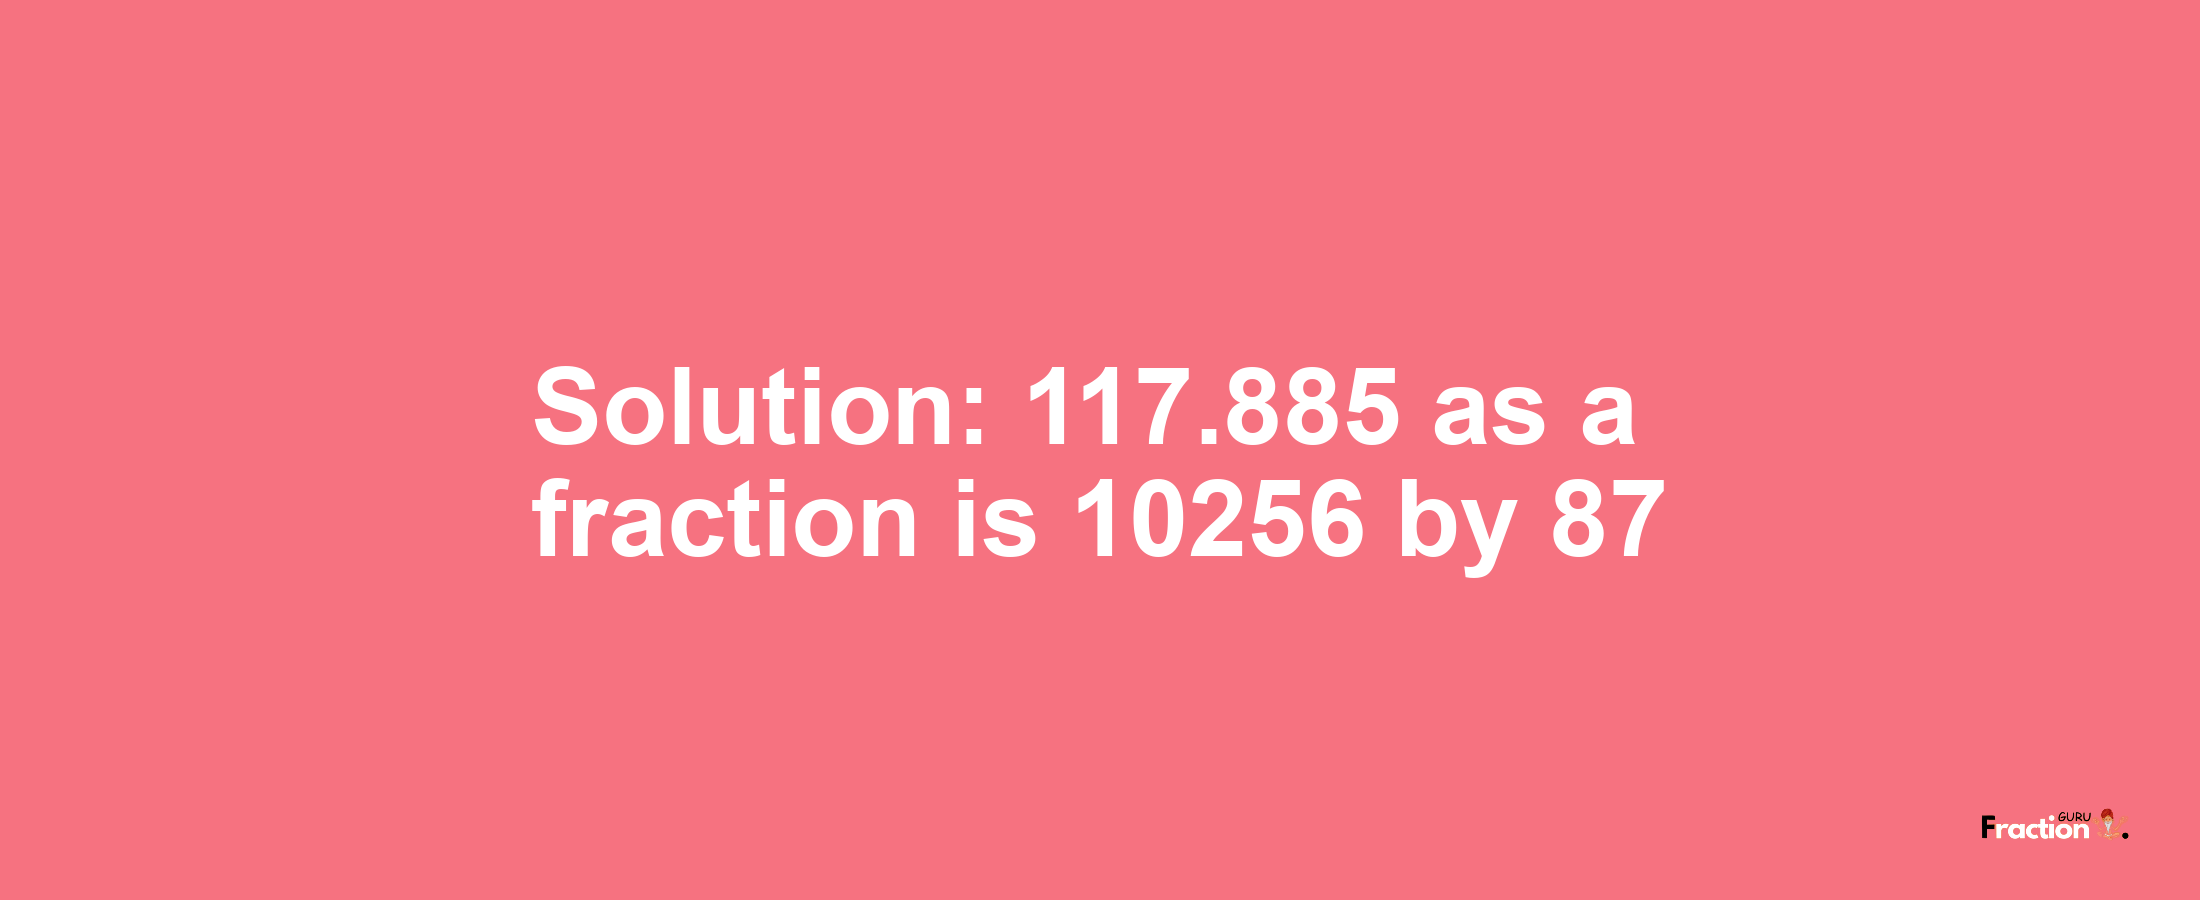 Solution:117.885 as a fraction is 10256/87